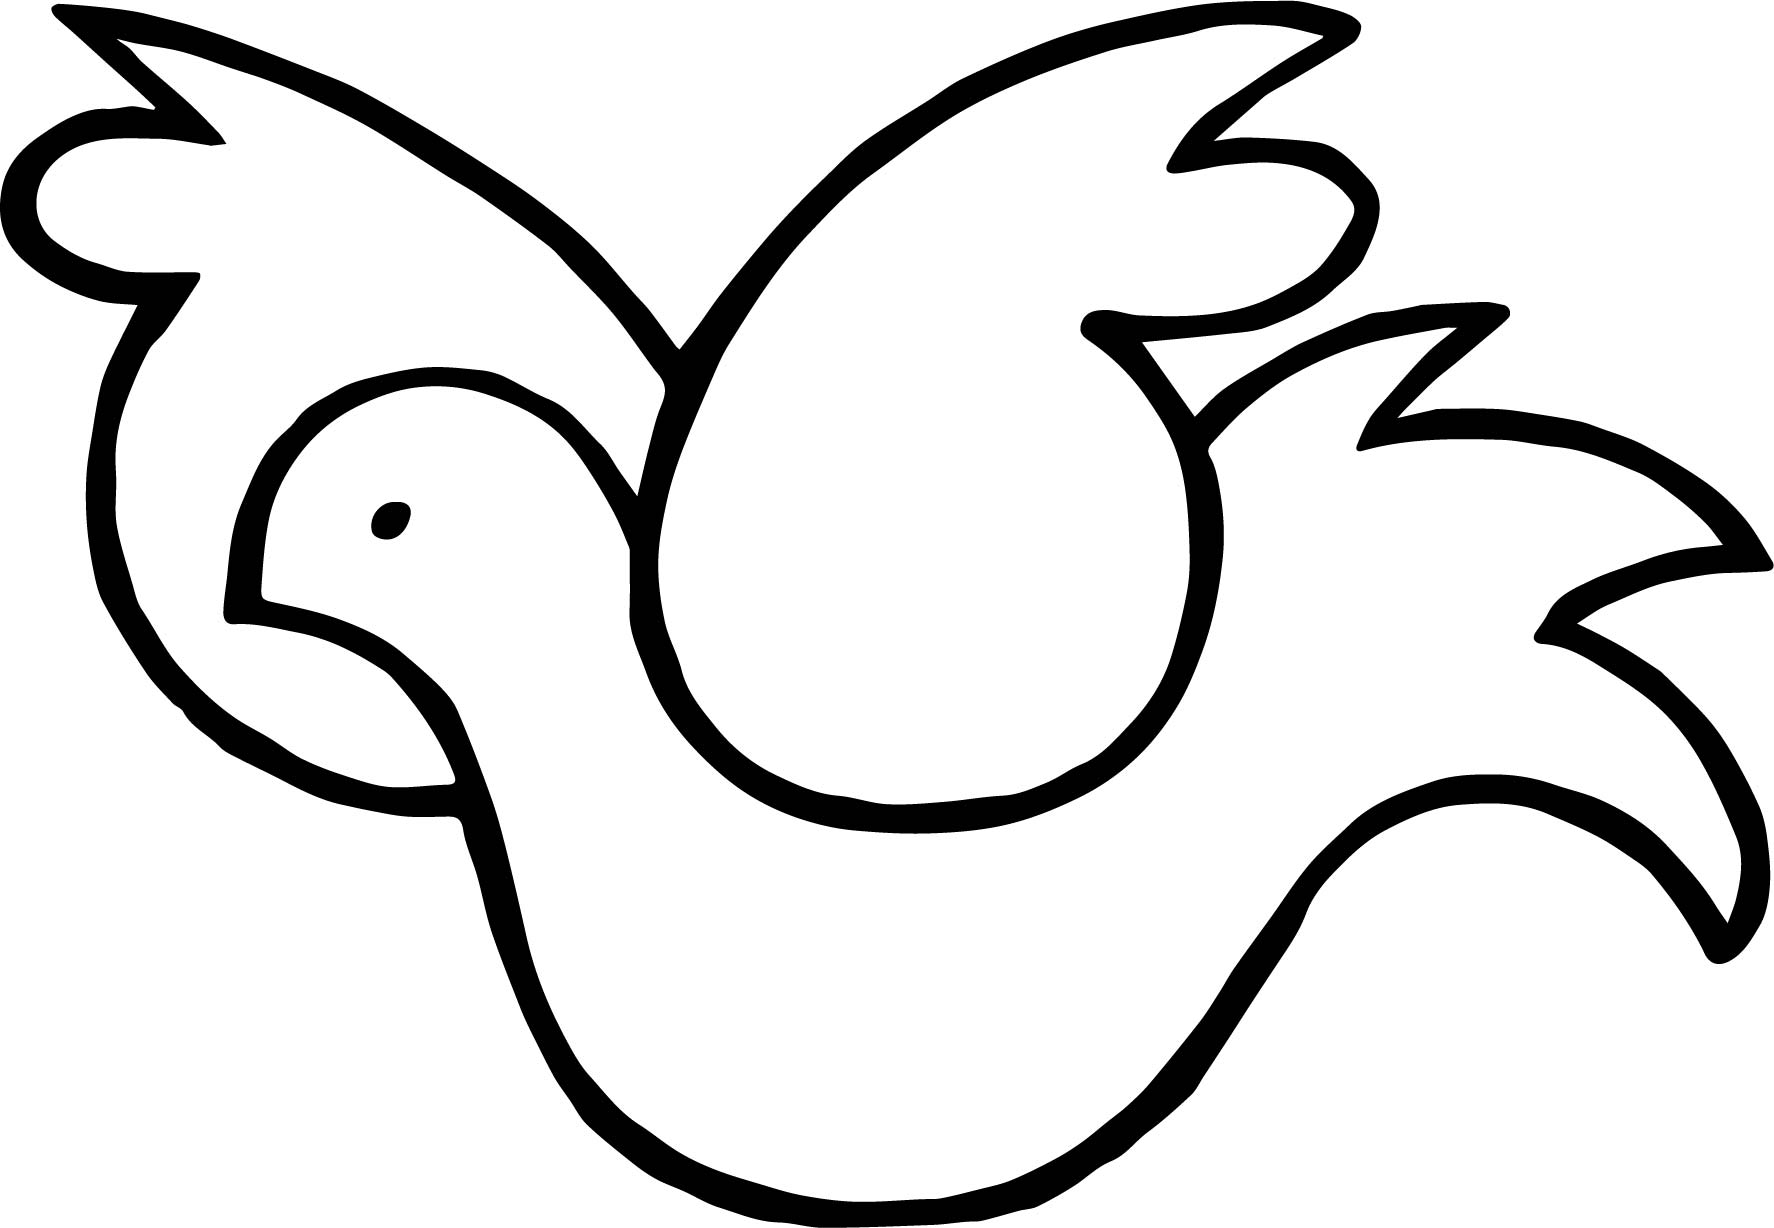 pictures of doves to color dove coloring pages 27838 bestofcoloringcom color pictures of to doves 